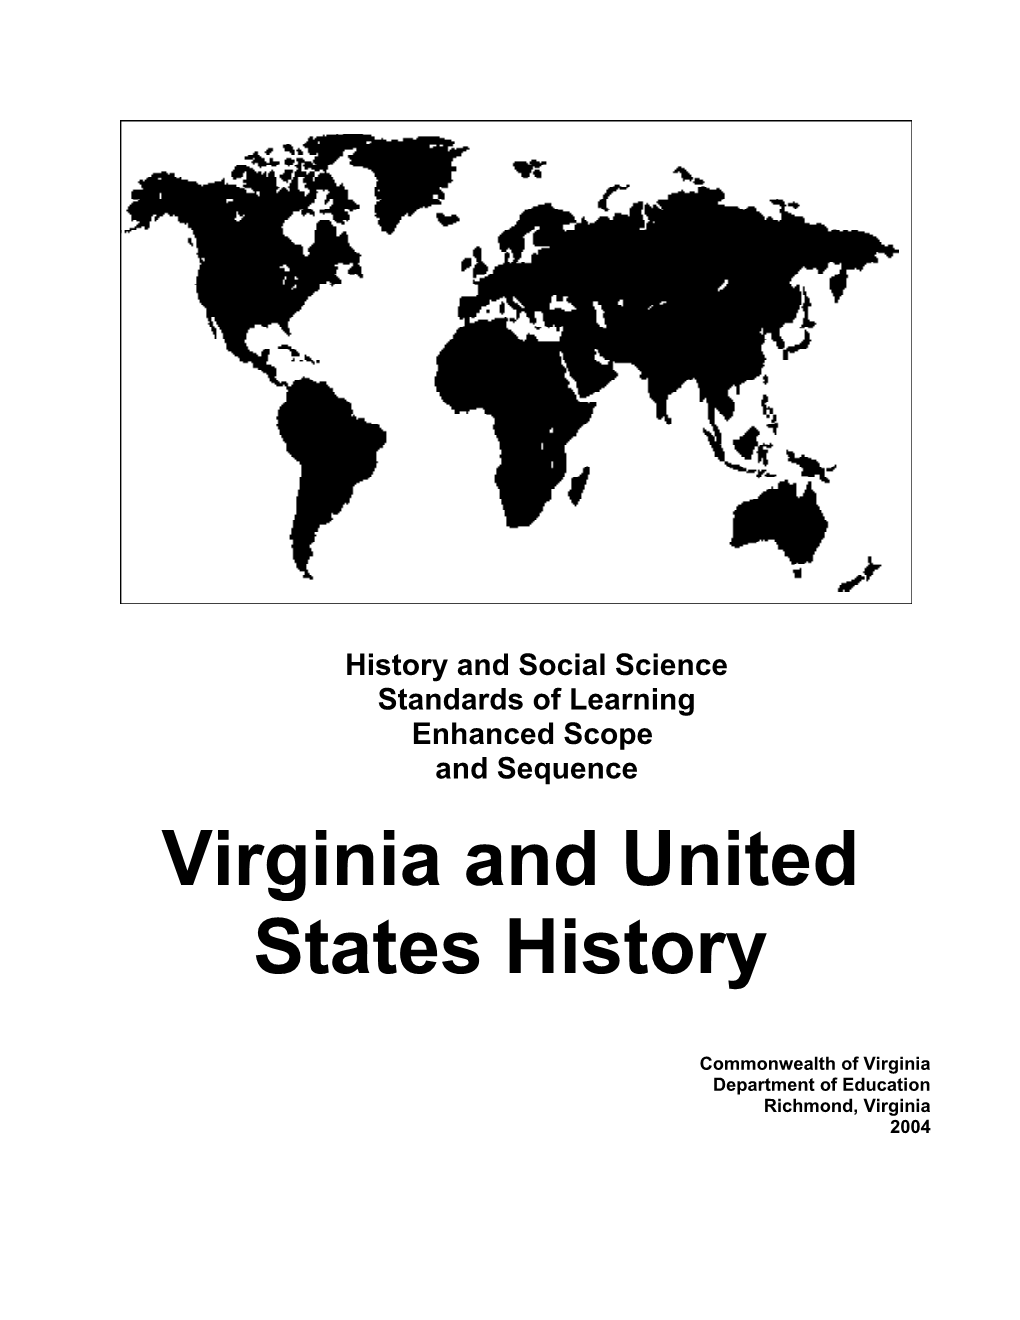 Virginia and United States History